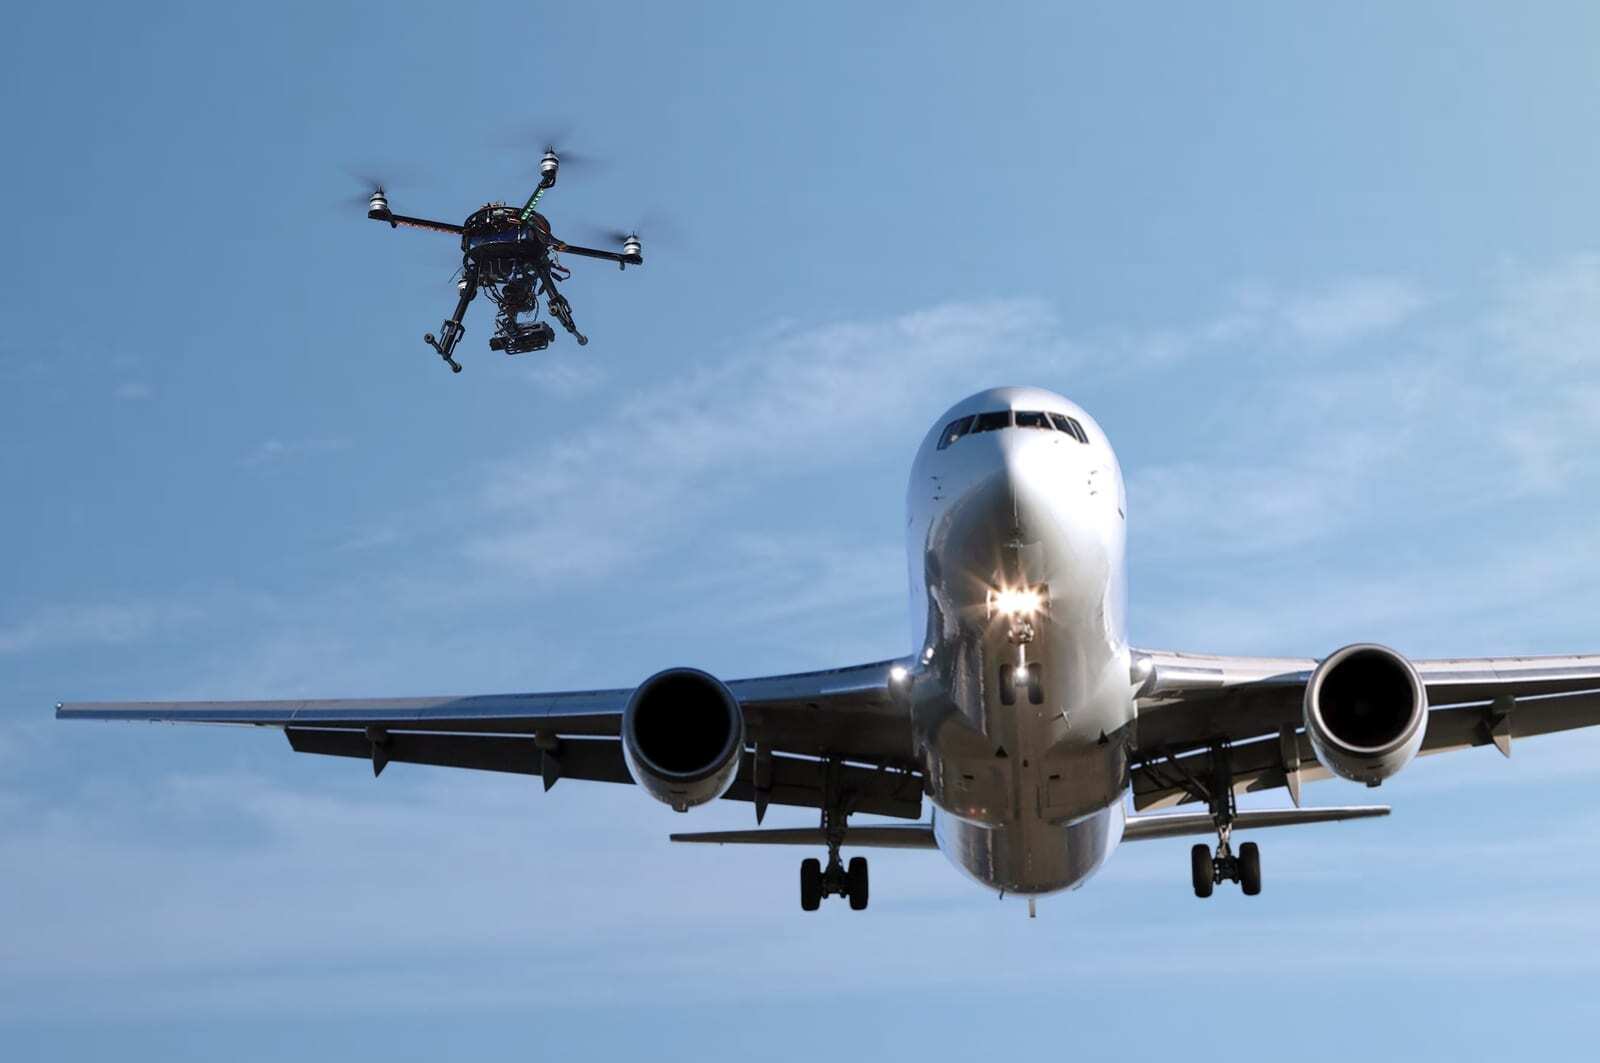 Small drone flying near a commercial aircraft on final approach